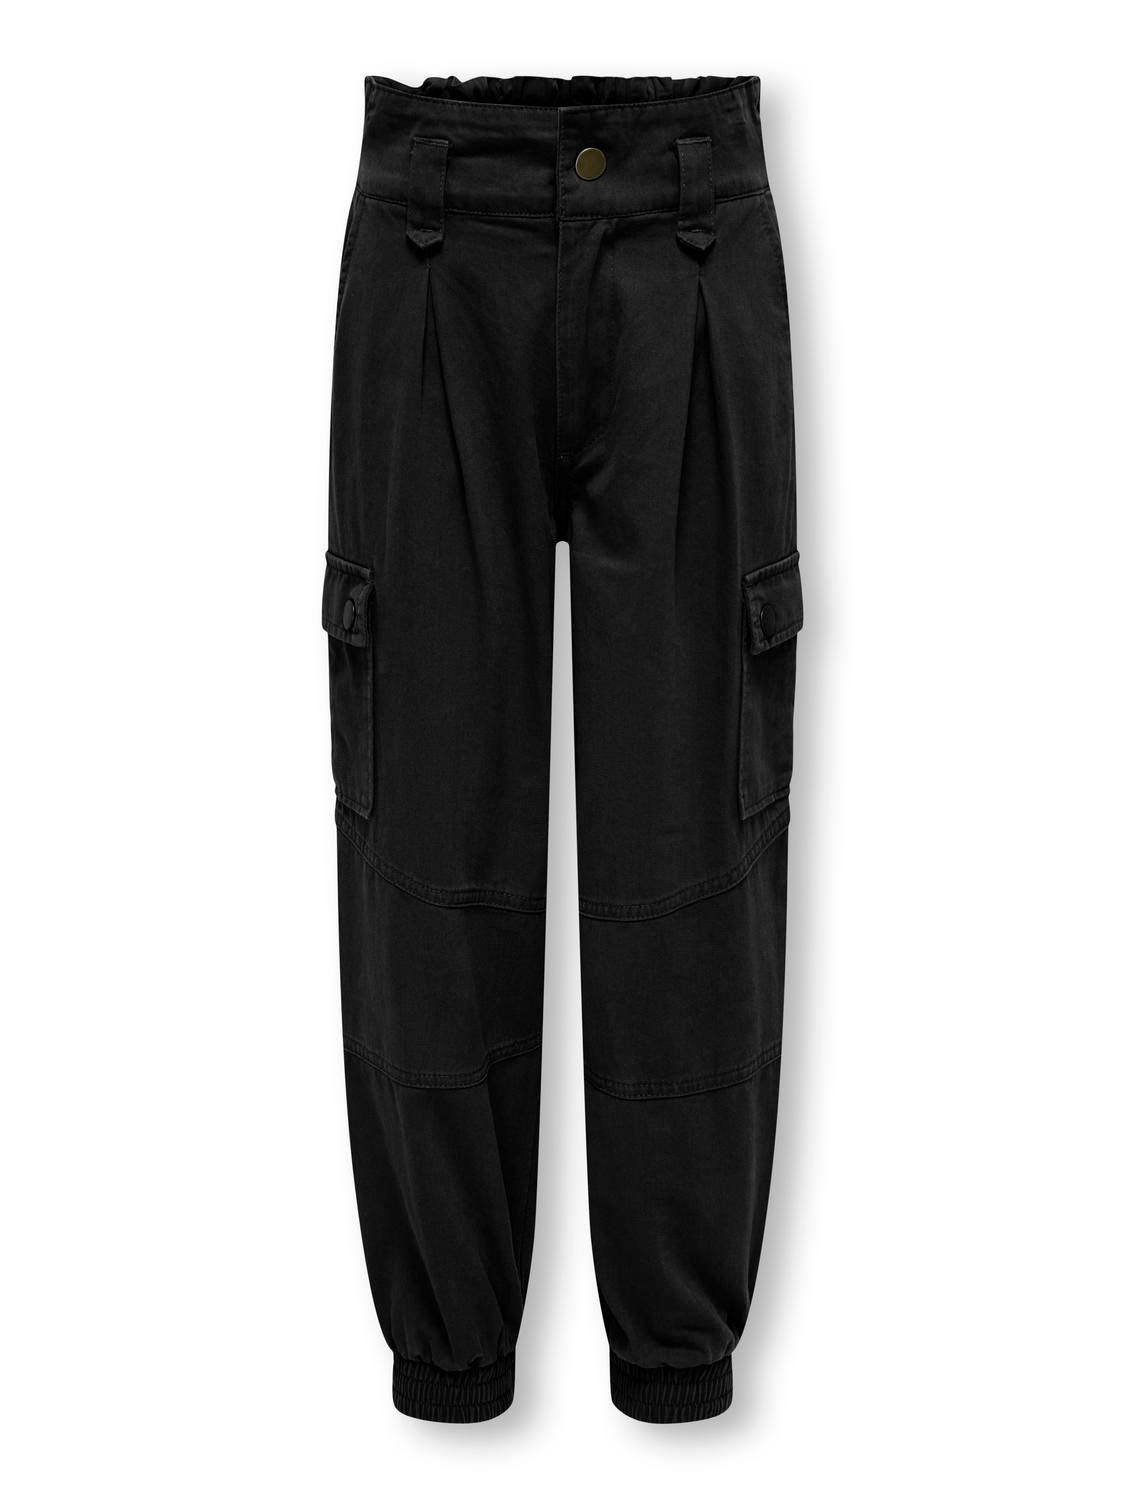 ONLY Cargo Fit Elasticated hems Trousers -Black - 15303221